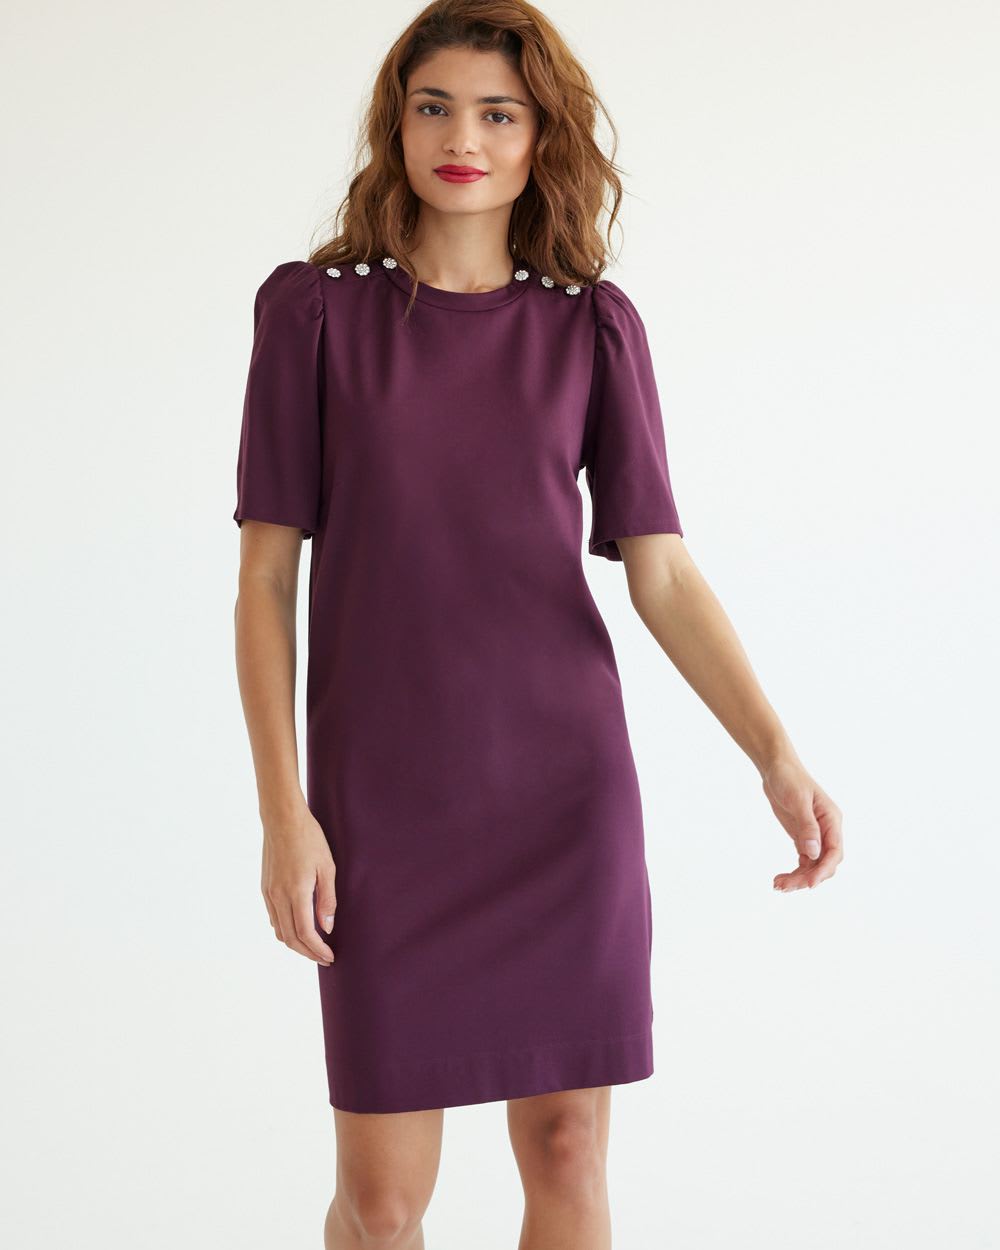 Short-Sleeve Shift Dress with Buttons at Shoulders